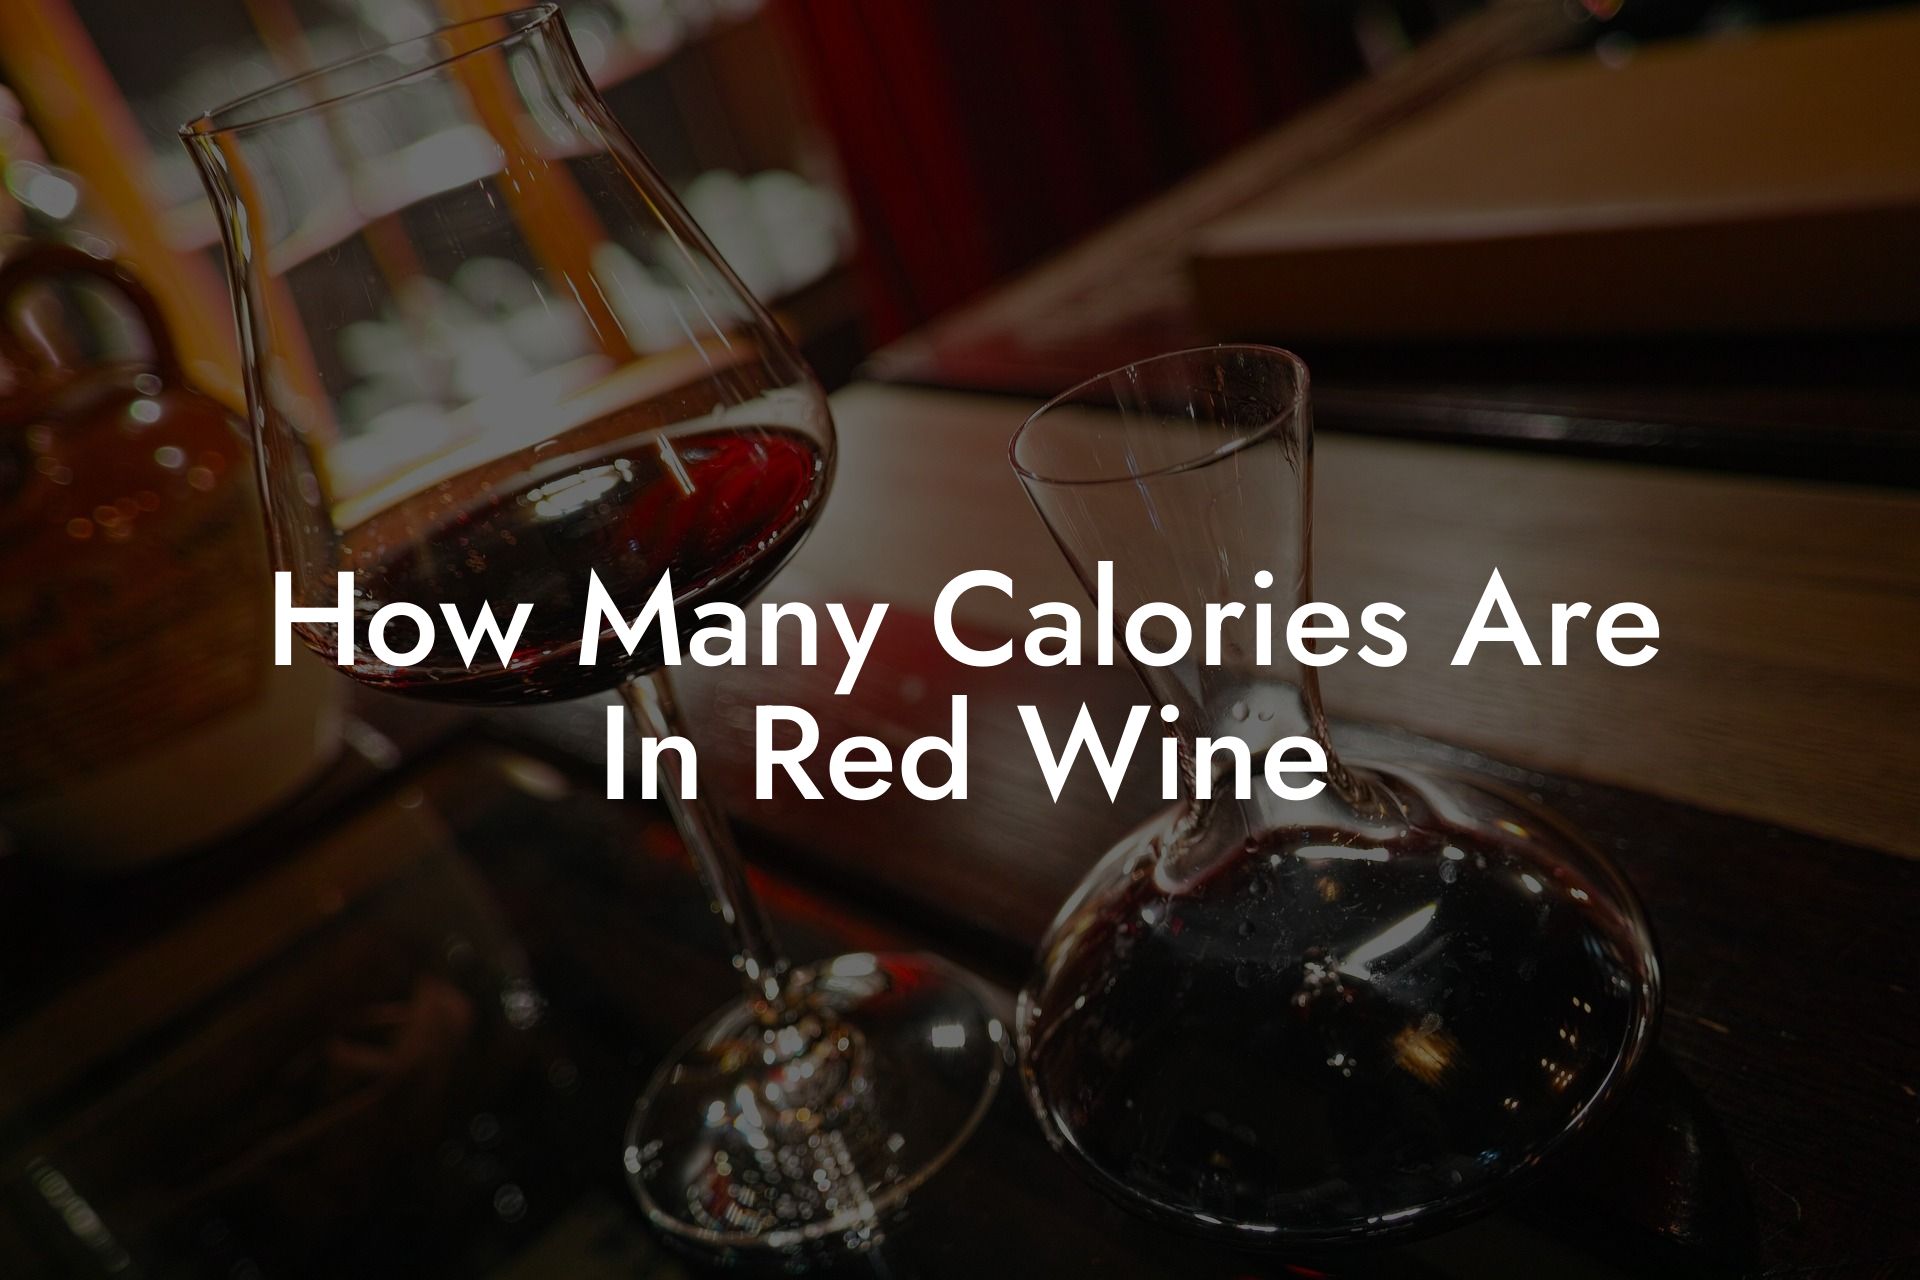 How Many Calories Are In Red Wine